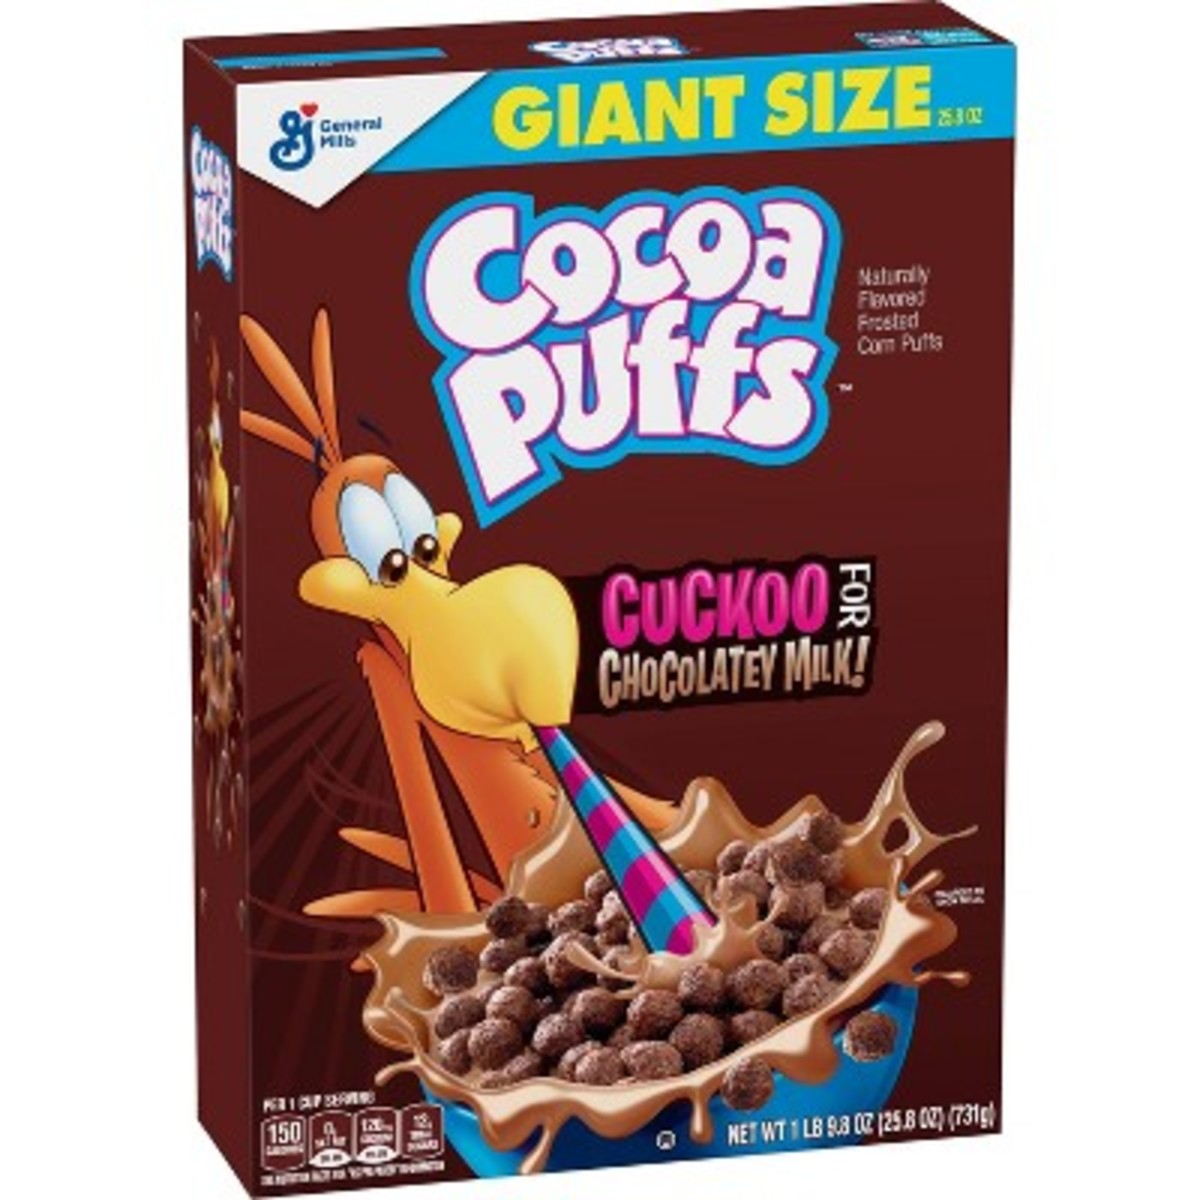 In 1956, General Mills introduced its beloved Cocoa Puffs breakfast cereal.